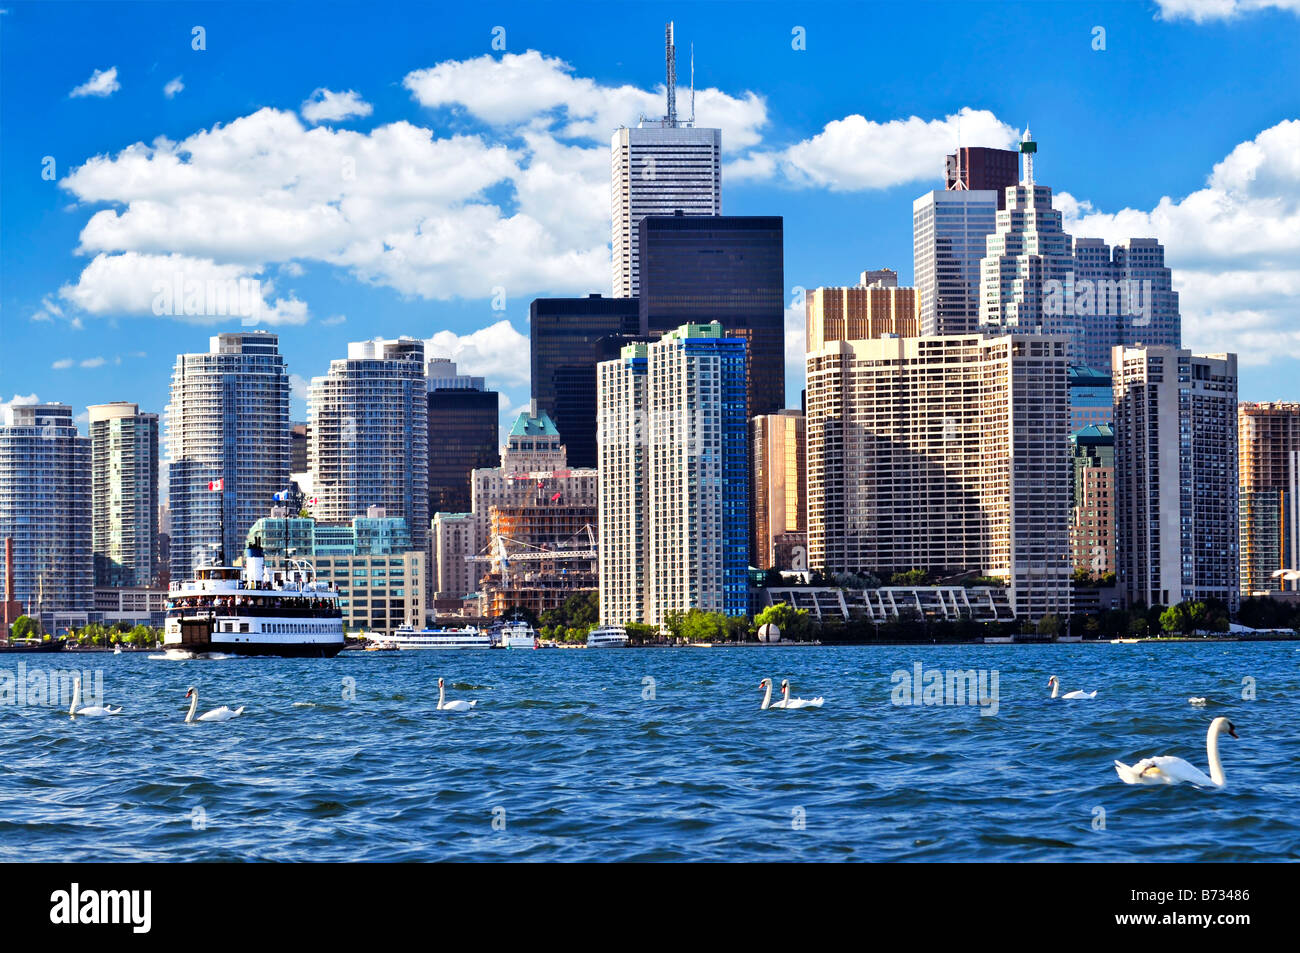 Toronto waterfront with white swans in the harbour Stock Photo